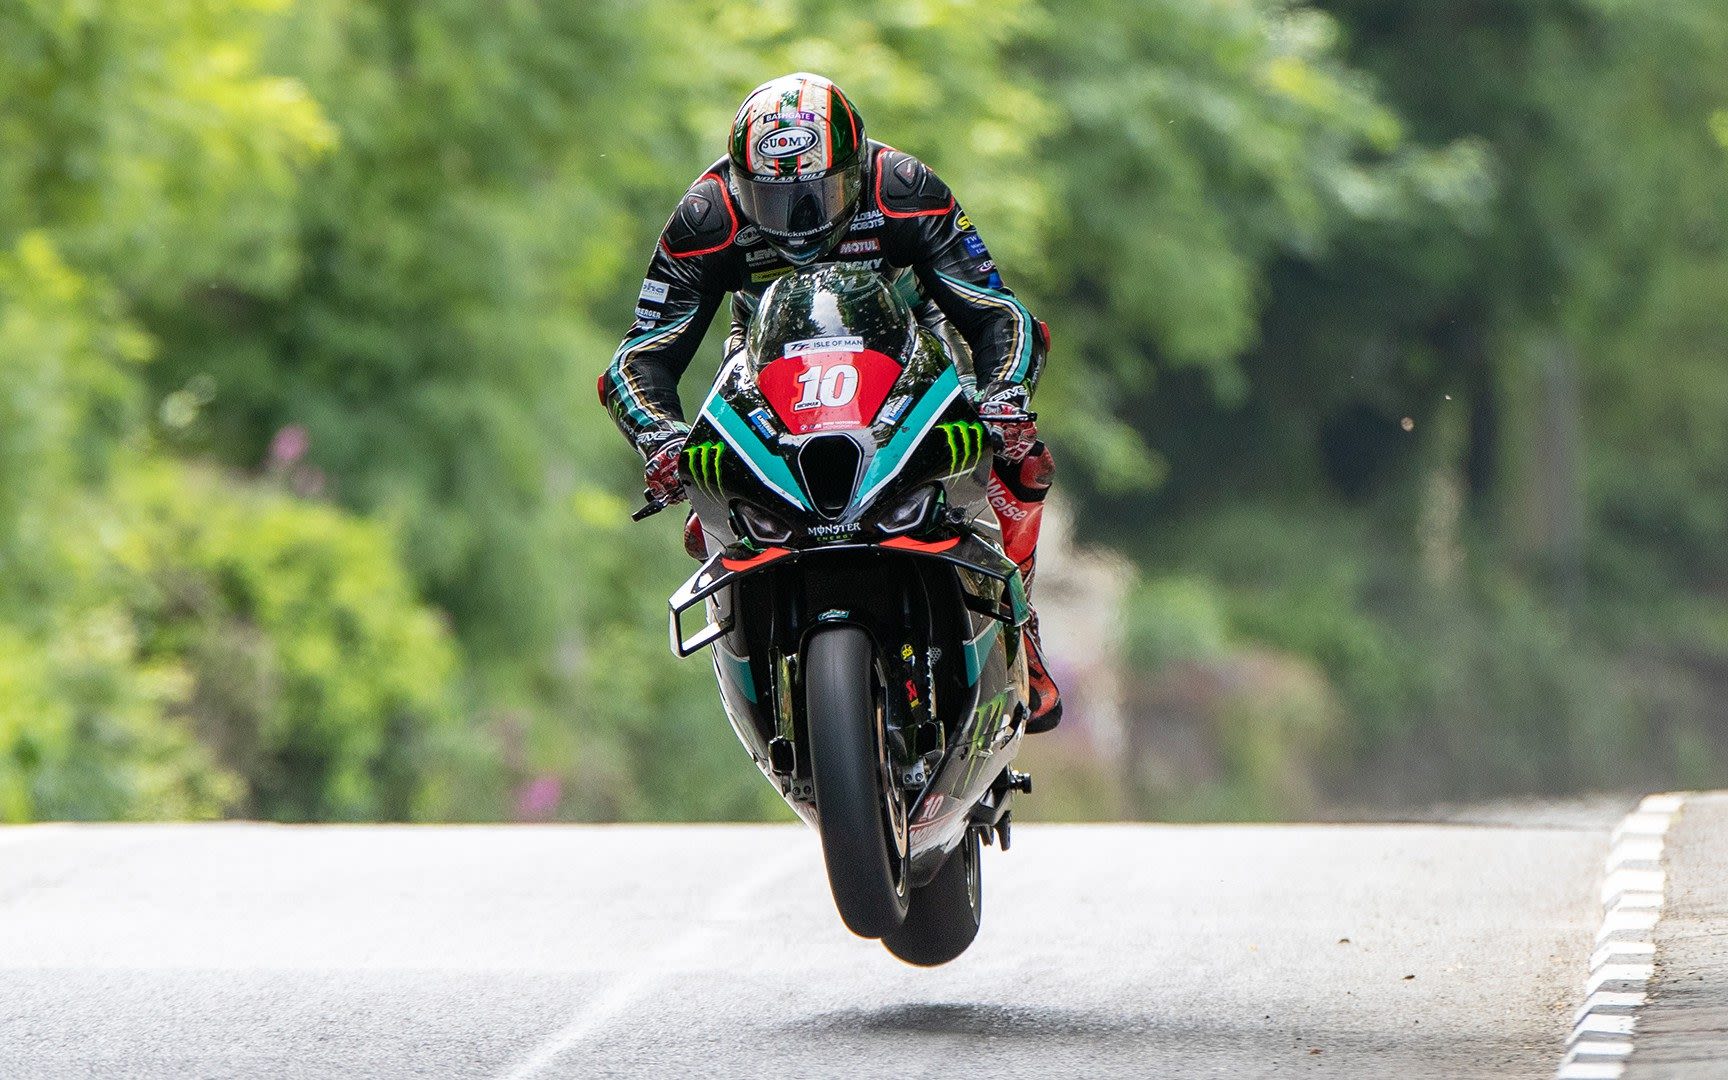 Isle of Man TT preview – the men behind the madness